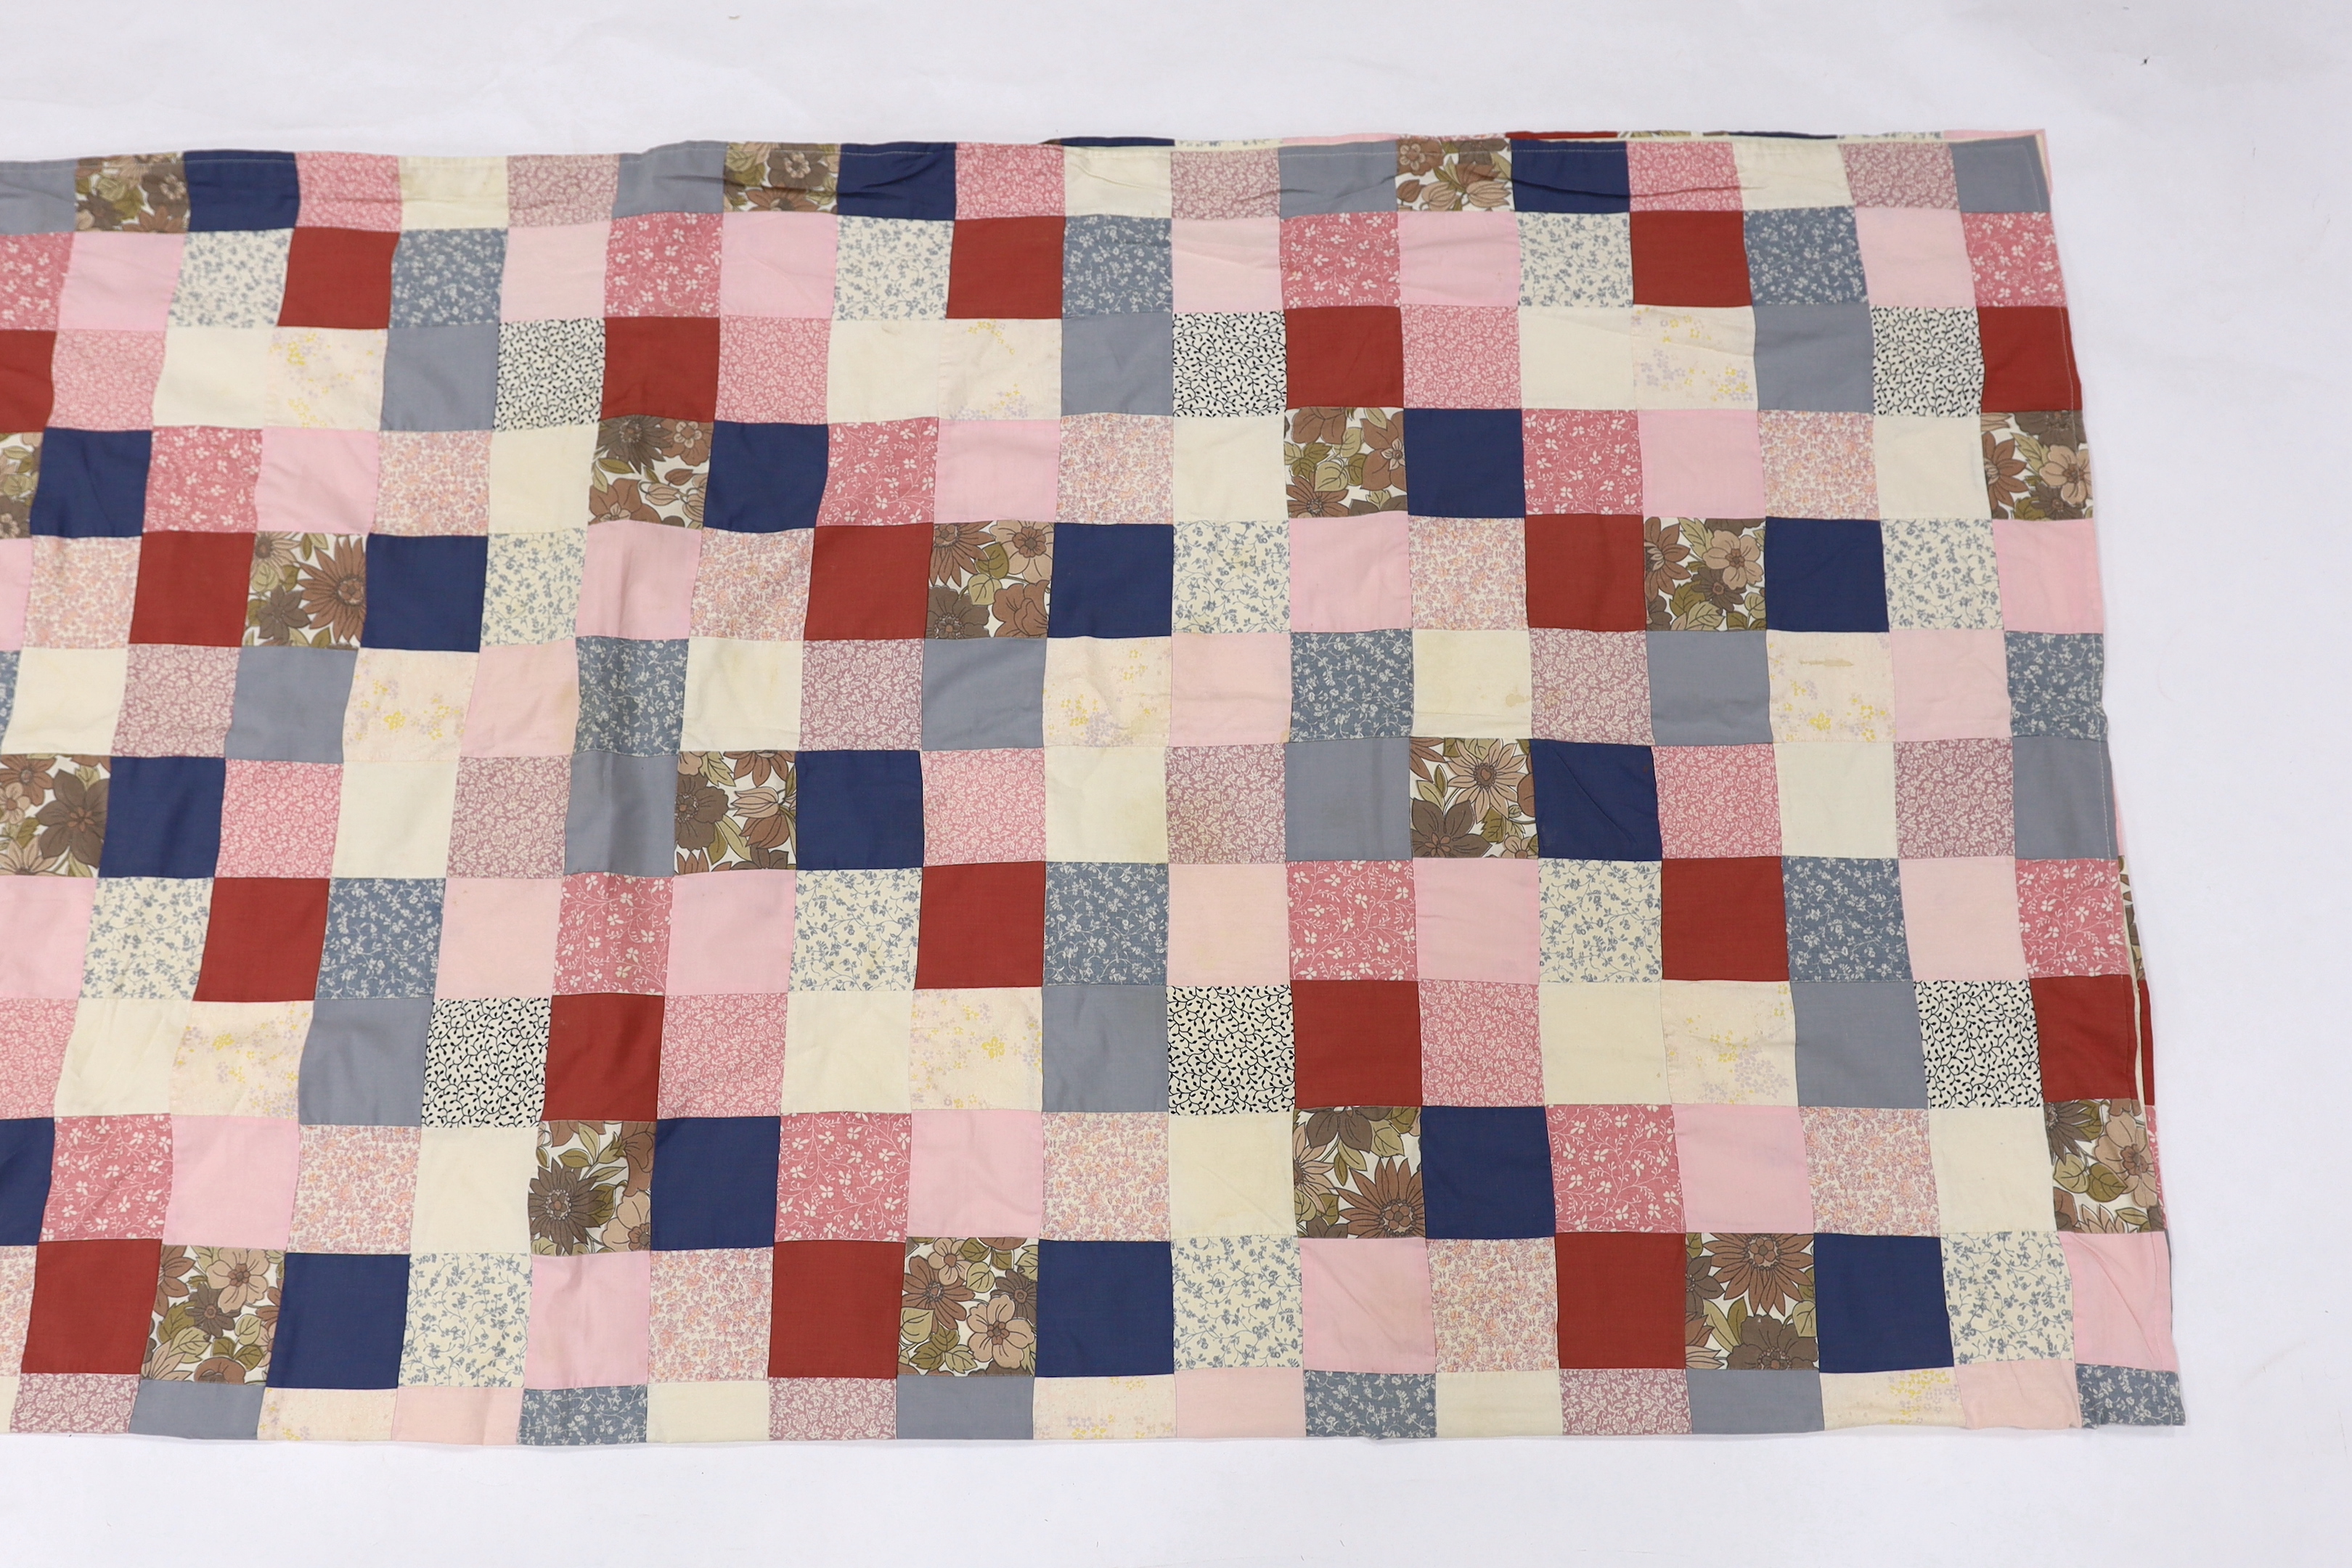 A patchwork bedcover, designed with Laura Ashley, 20th century fabrics, 215cm x 215cm sq.